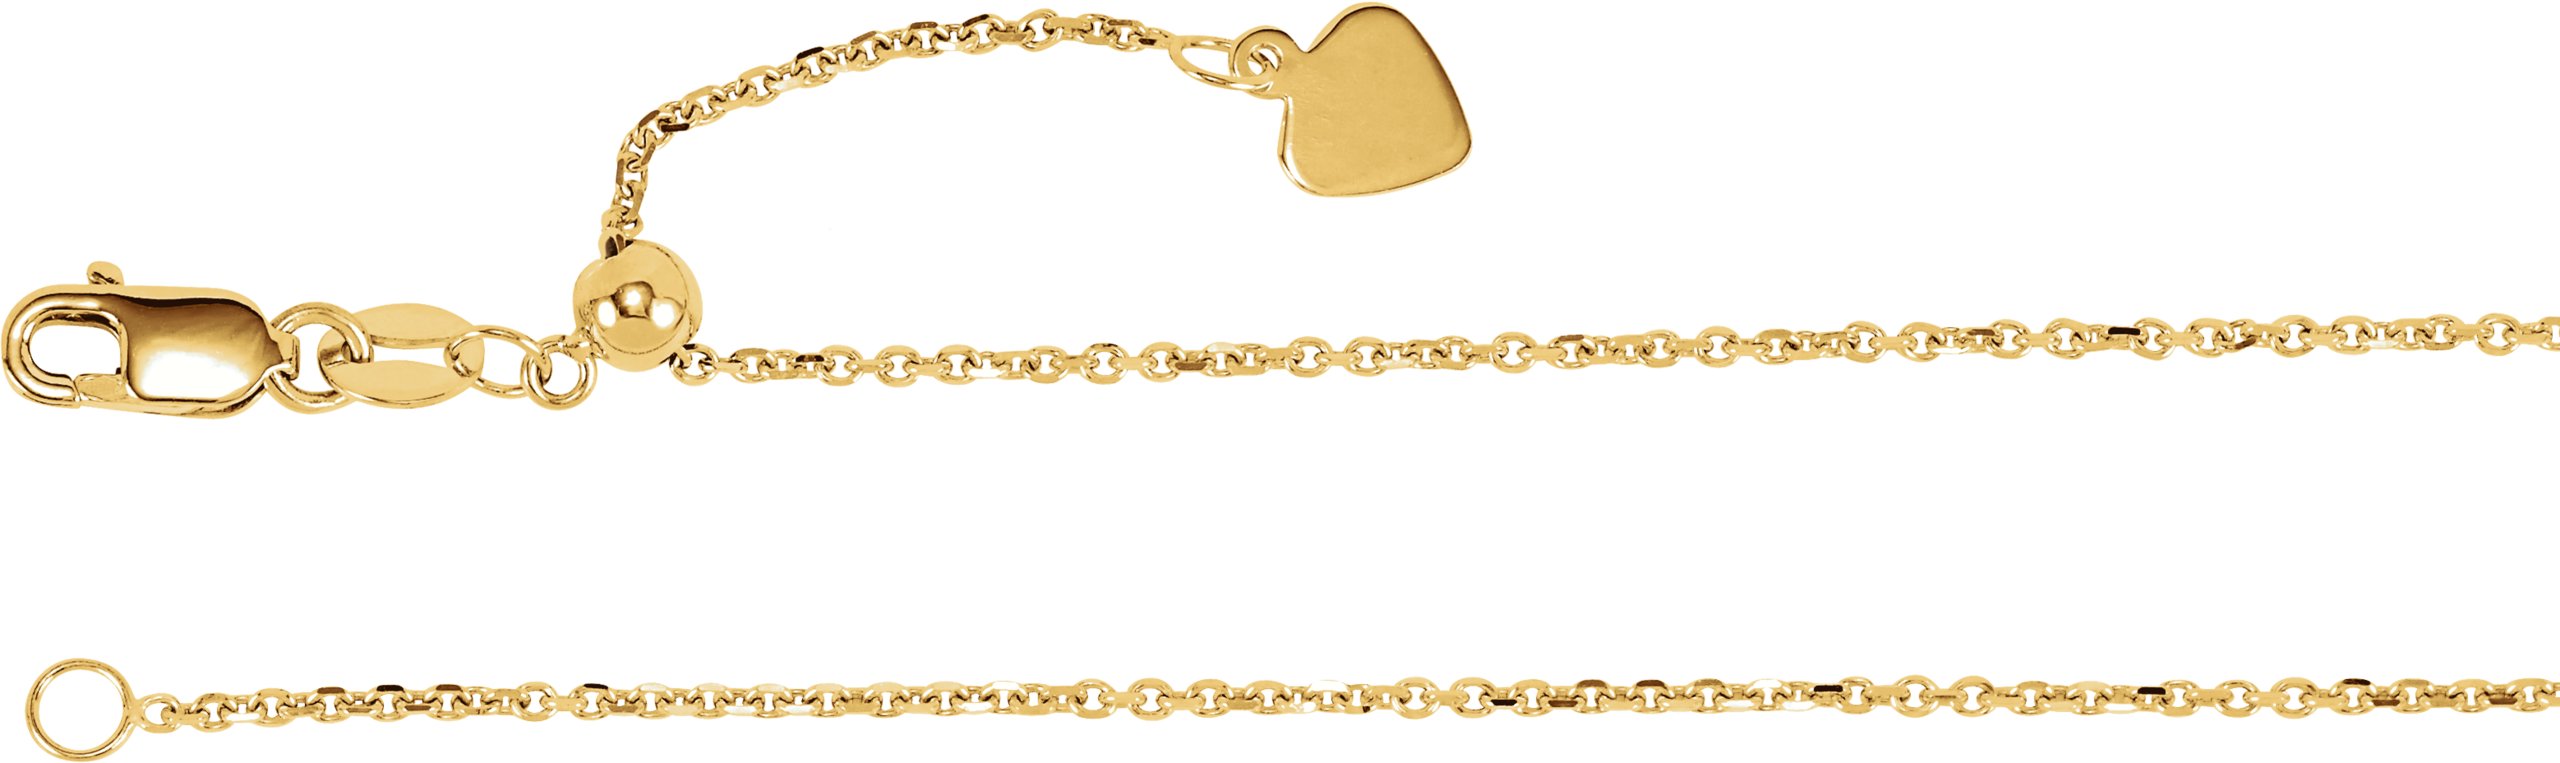 14K Yellow 1 mm Adjustable Cable 22" Chain